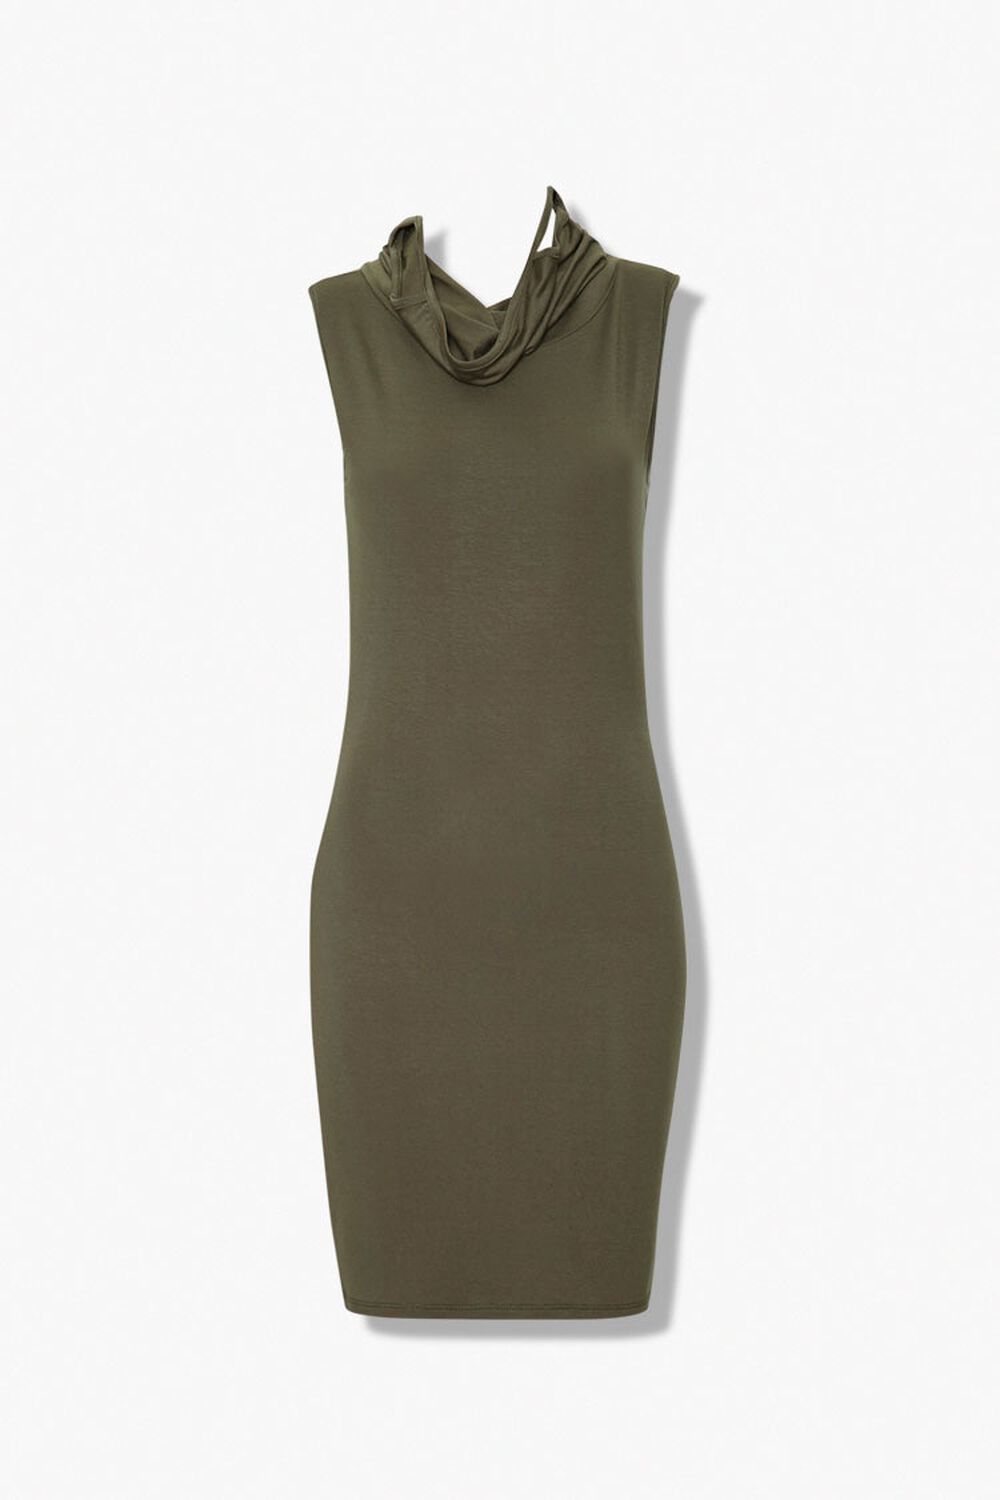 OLIVE Face Covering Bodycon Dress, image 1